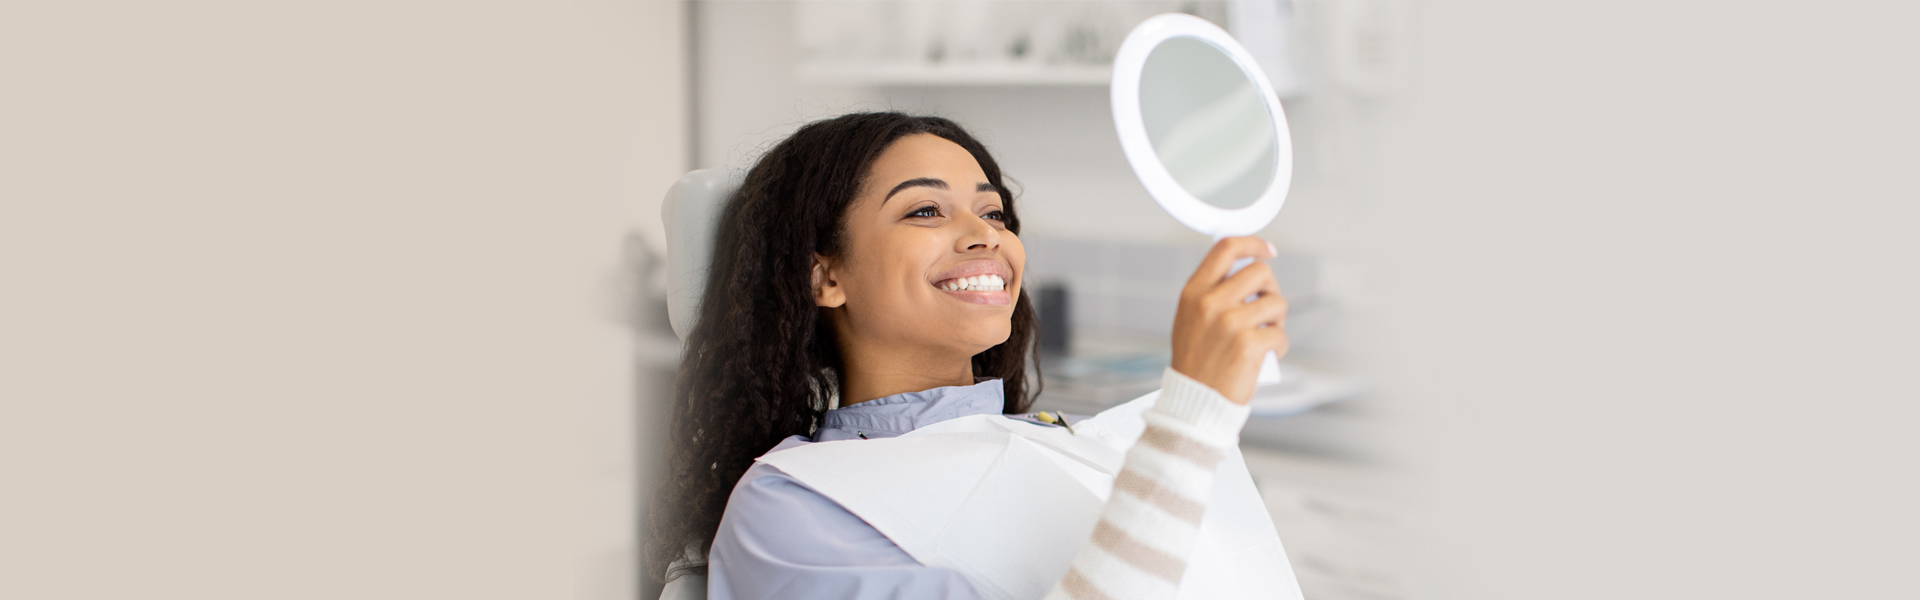 5 Natural Teeth Whitening Tips to Make Your Smile Shine 